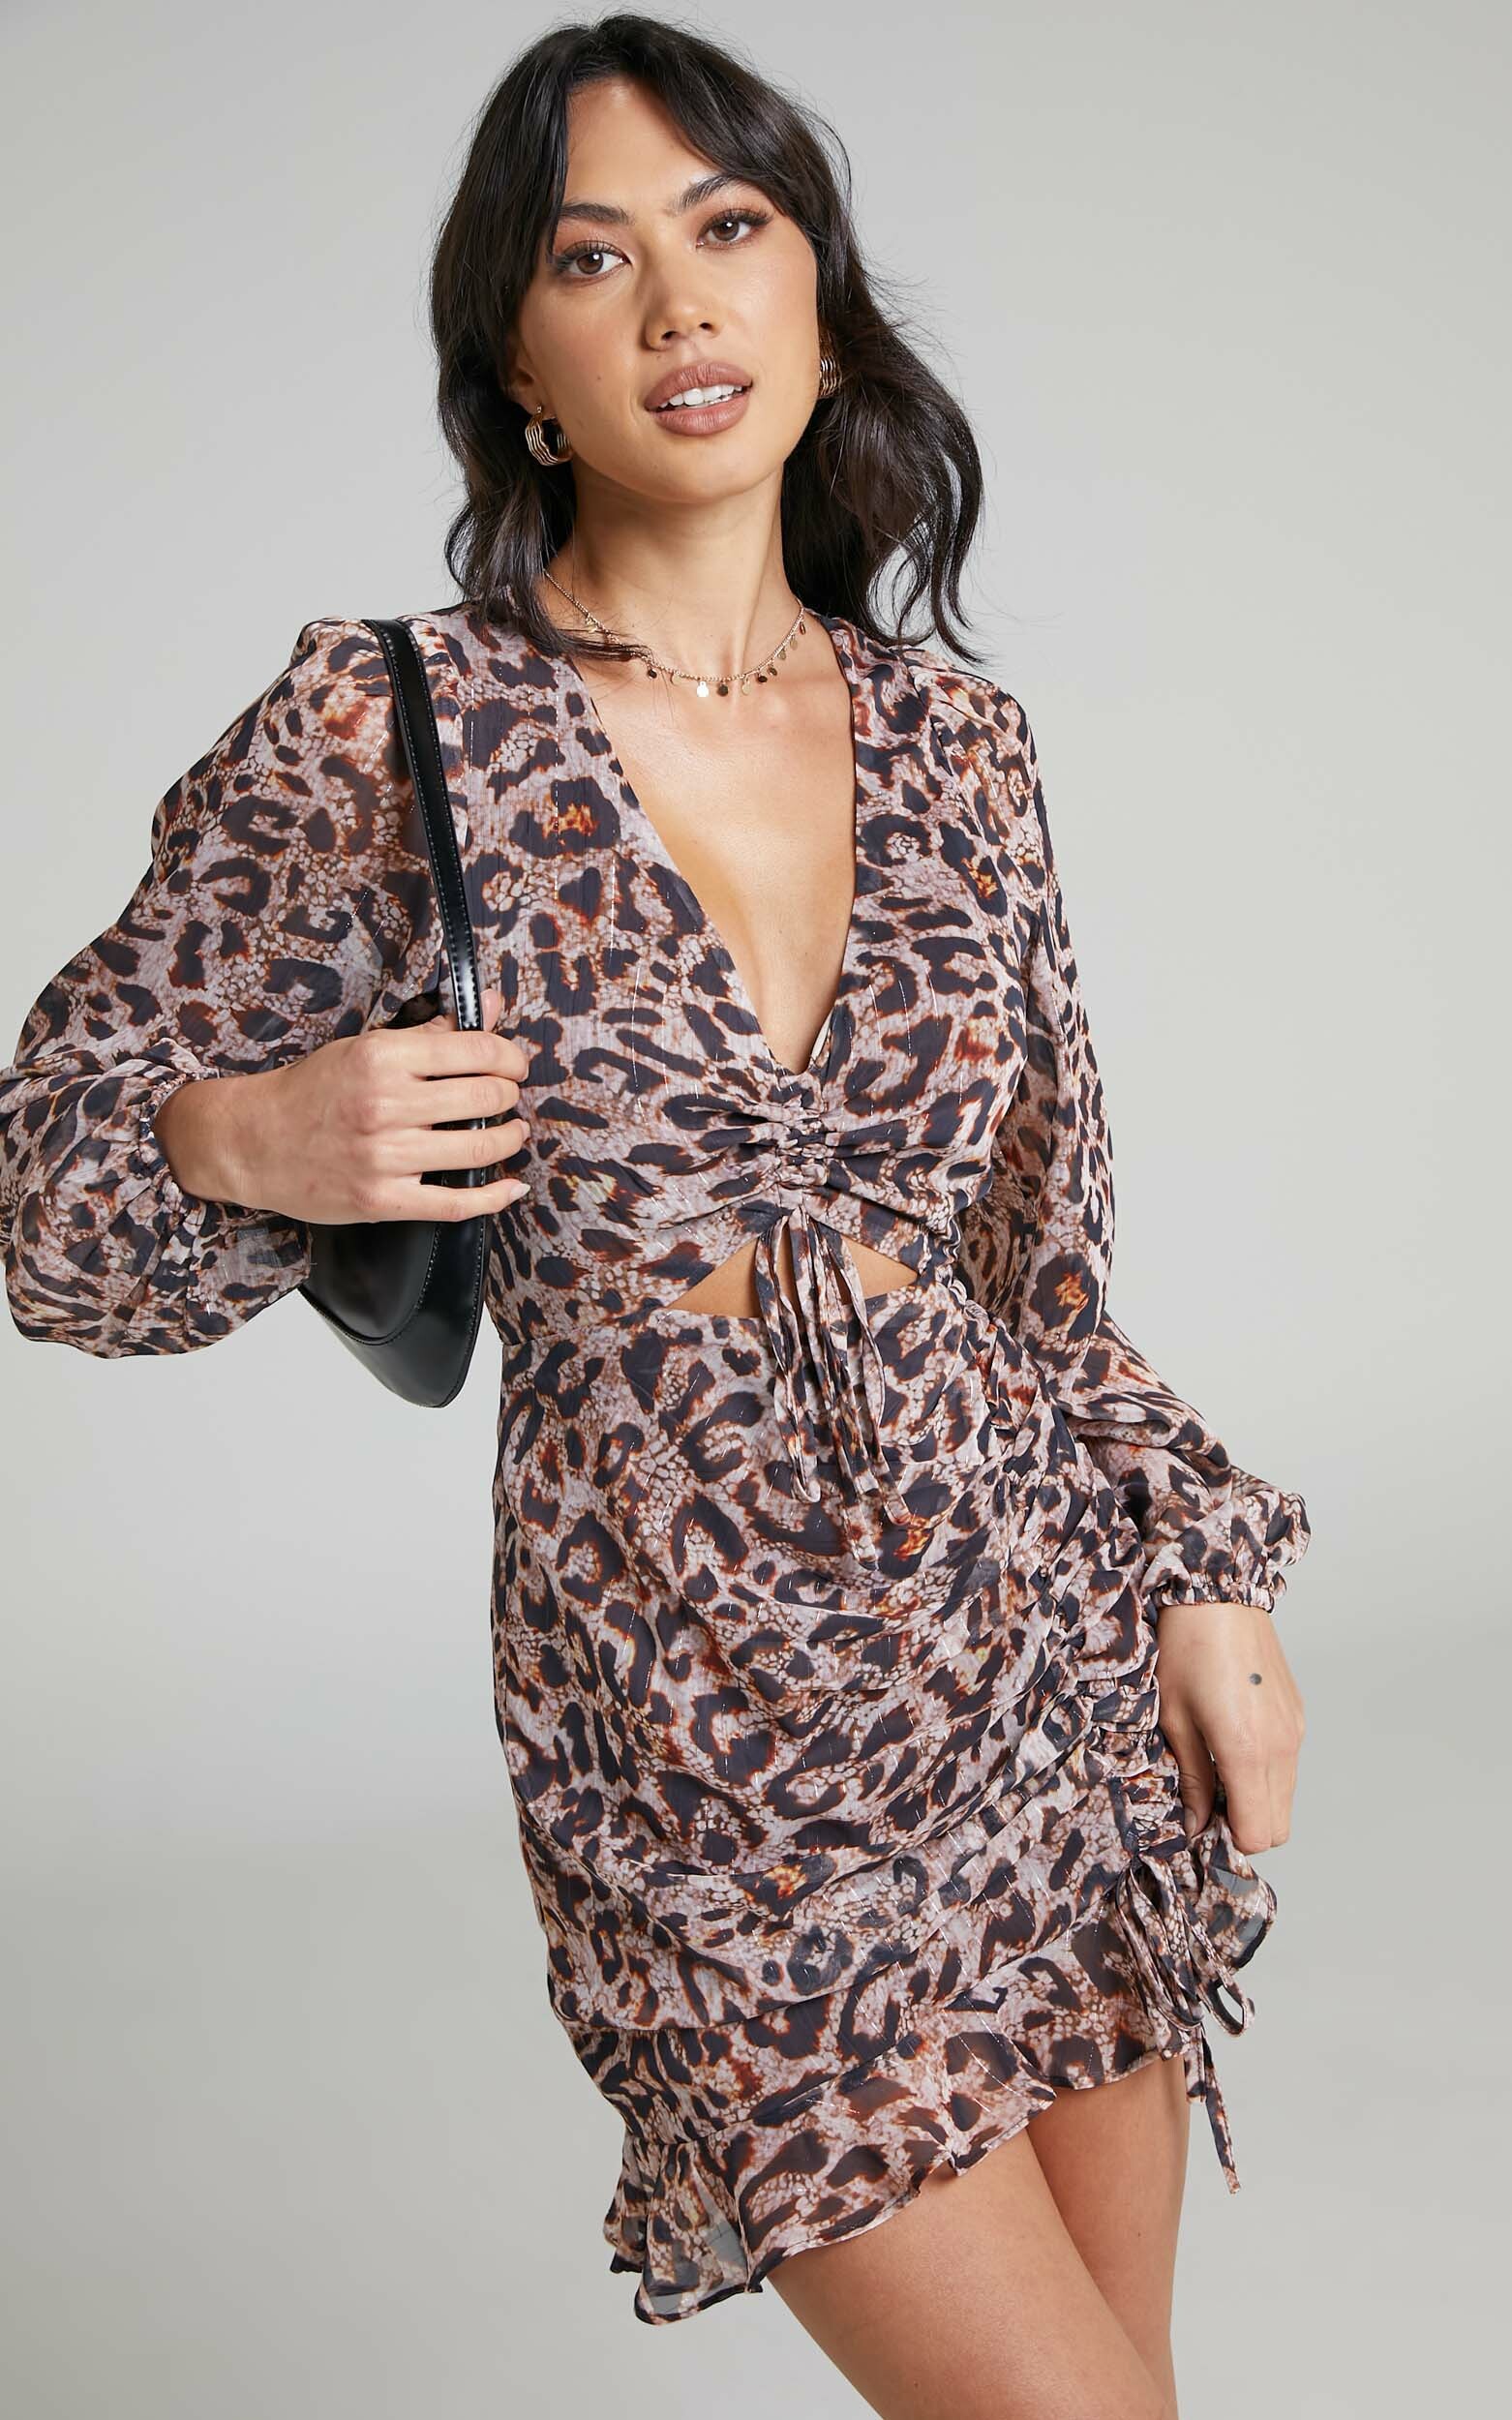 Arima Long Sleeve Cut Out Mini Dress in Brown Leopard Print - 04, BRN1, hi-res image number null